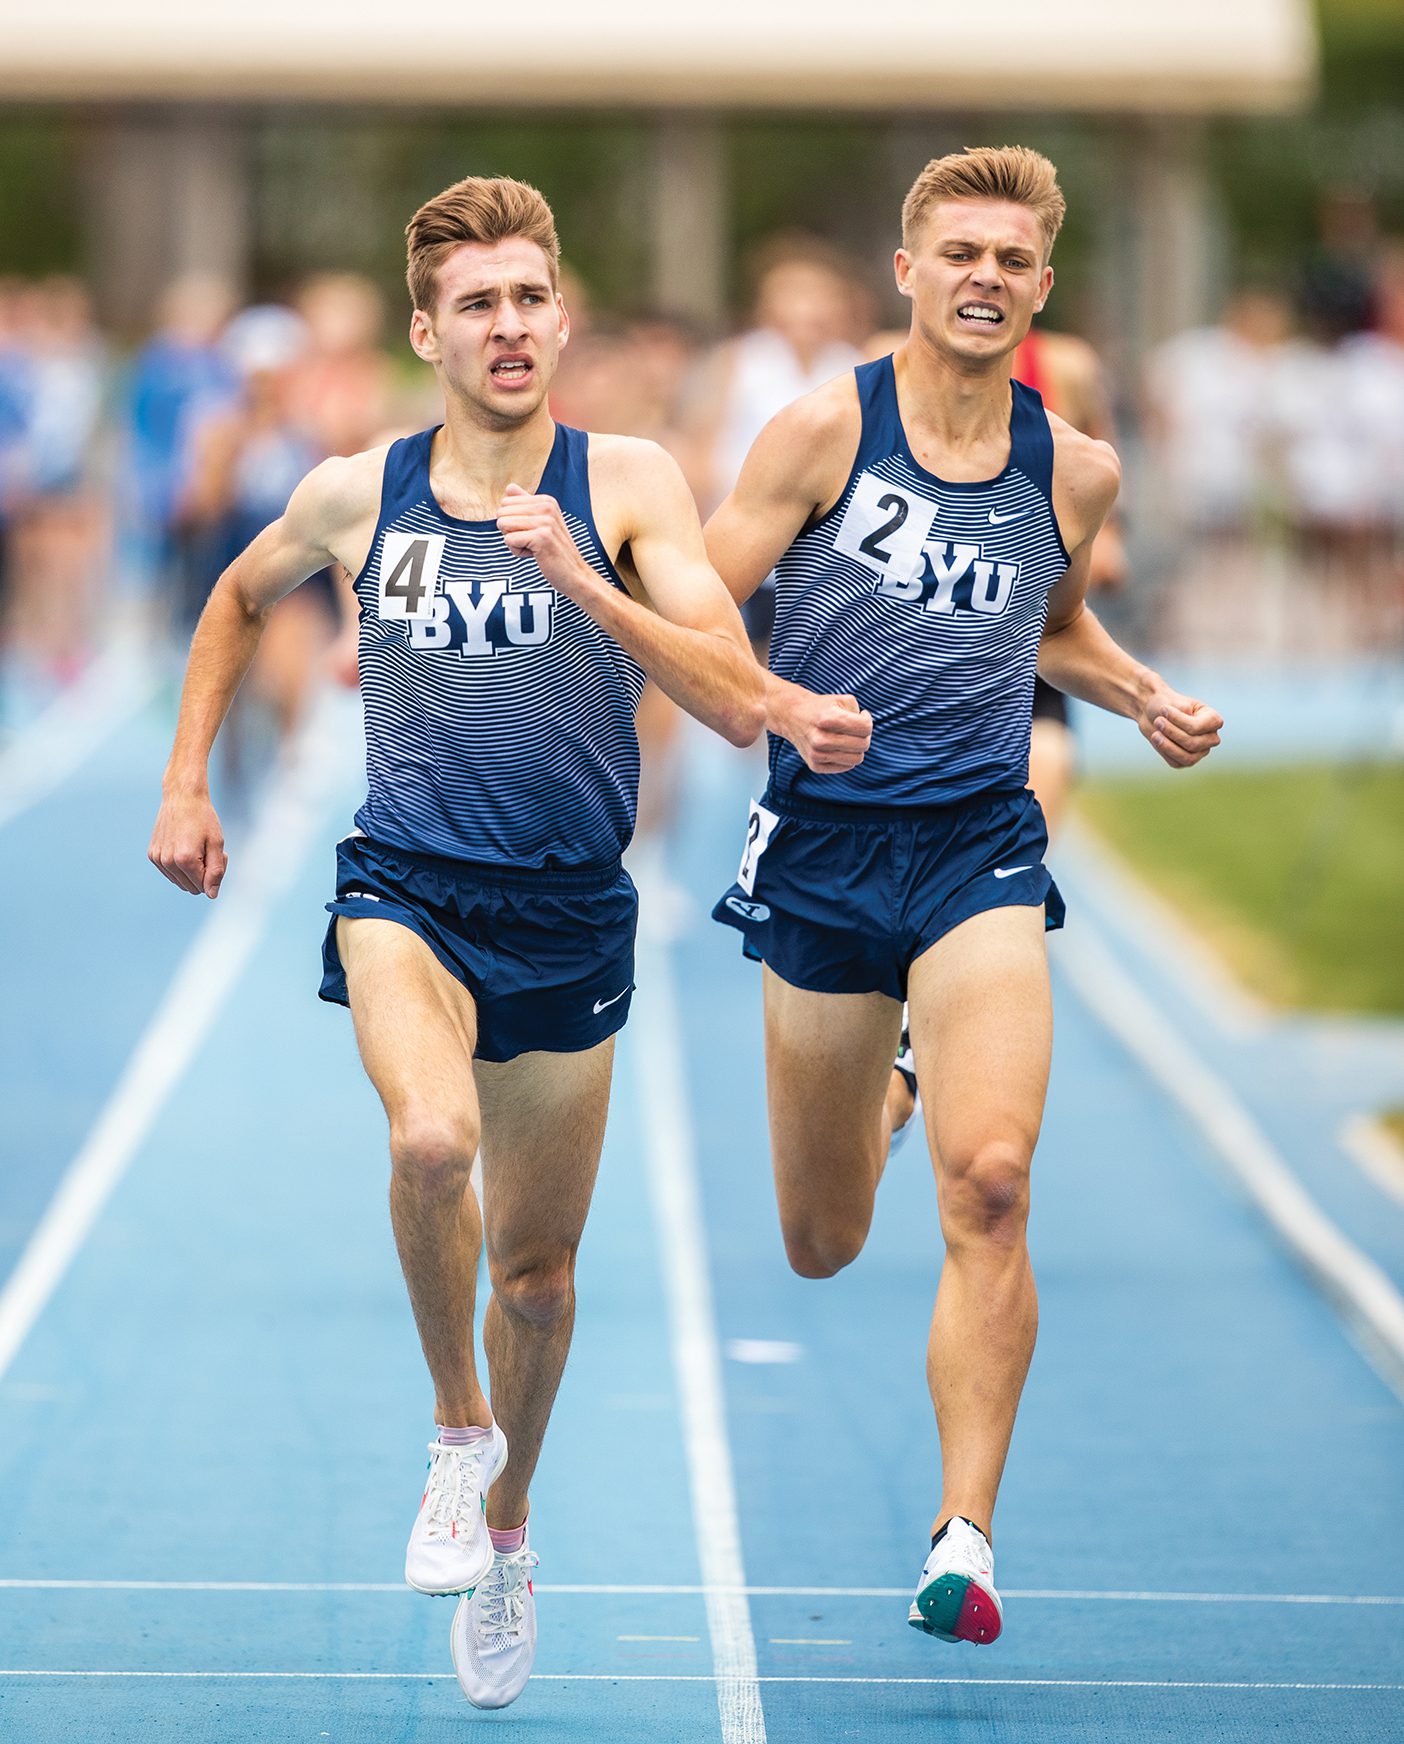 Two BYU runners, Casey Clinger and Lucas Bons, run next to each other on the track with exertion showing on their faces.